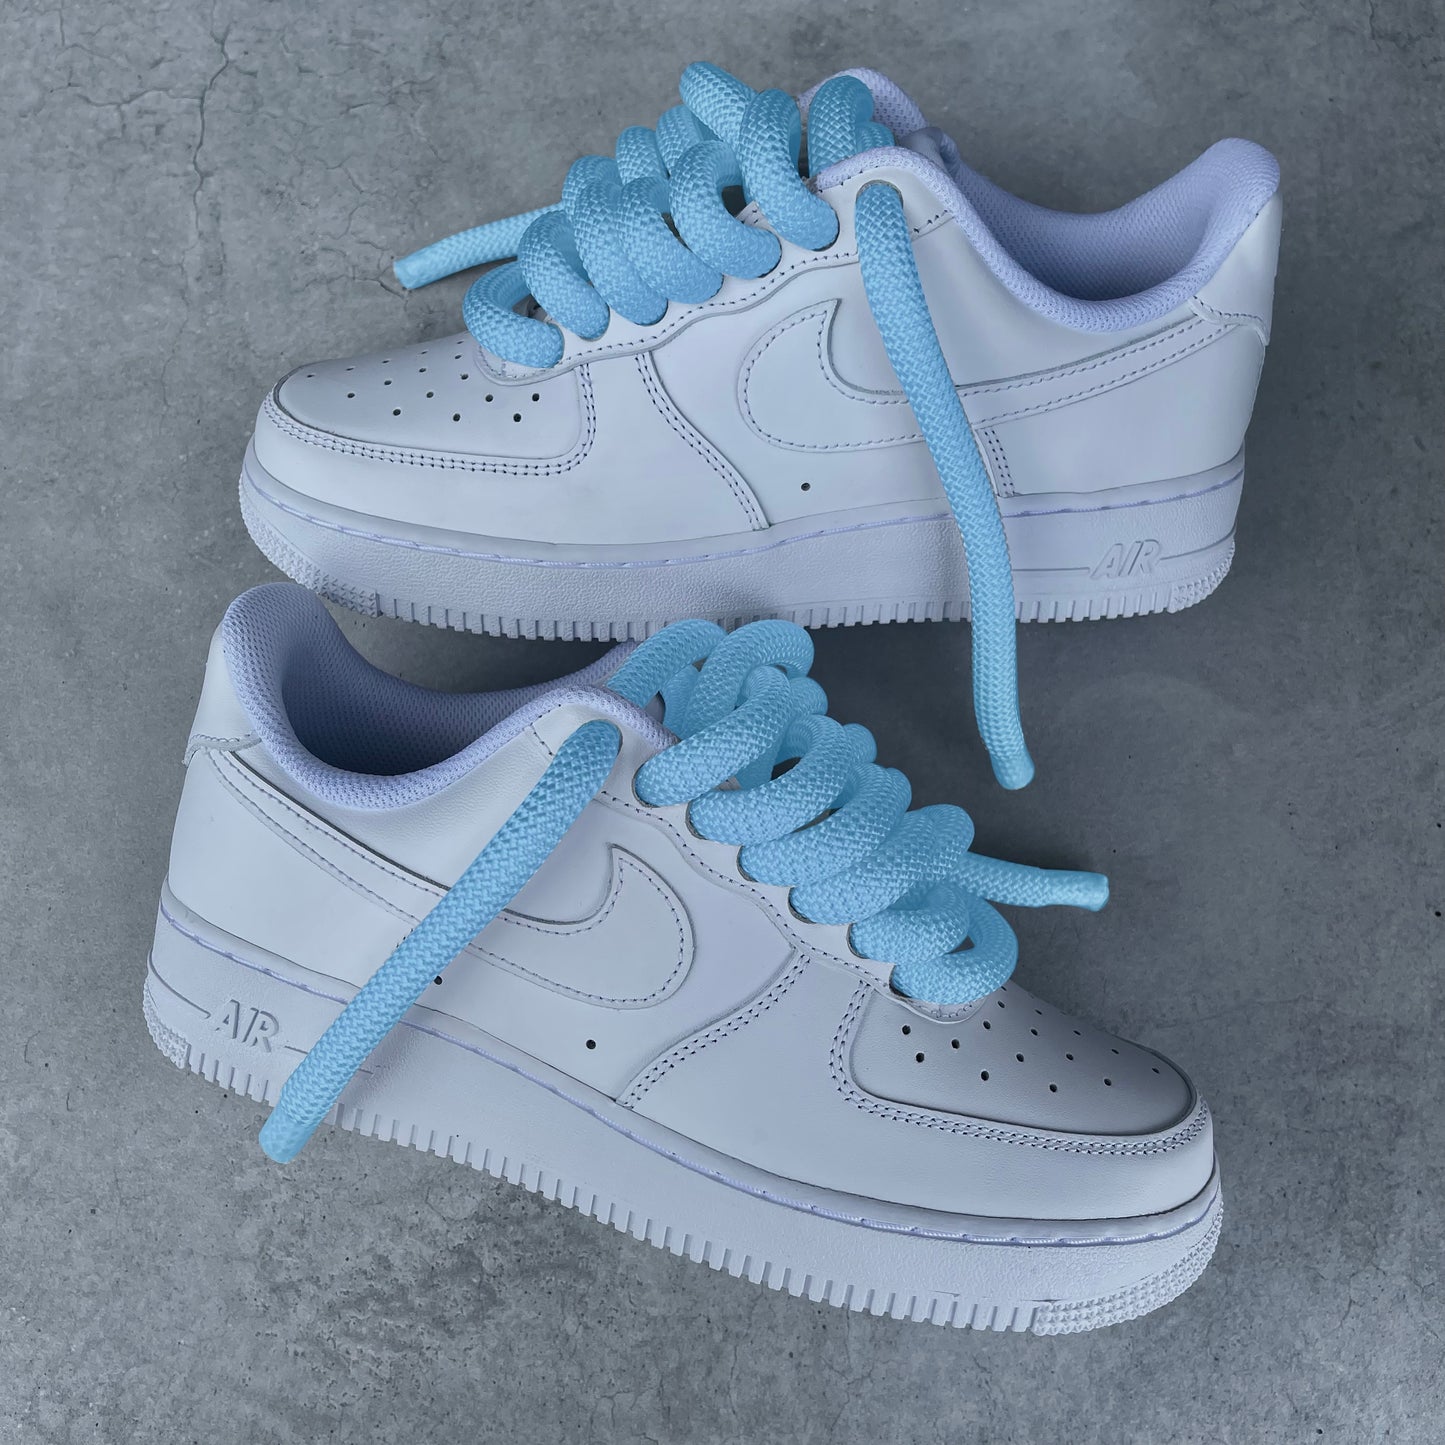 Custom AIR FORCE 1 - Rope laces 2.0 (light blue)